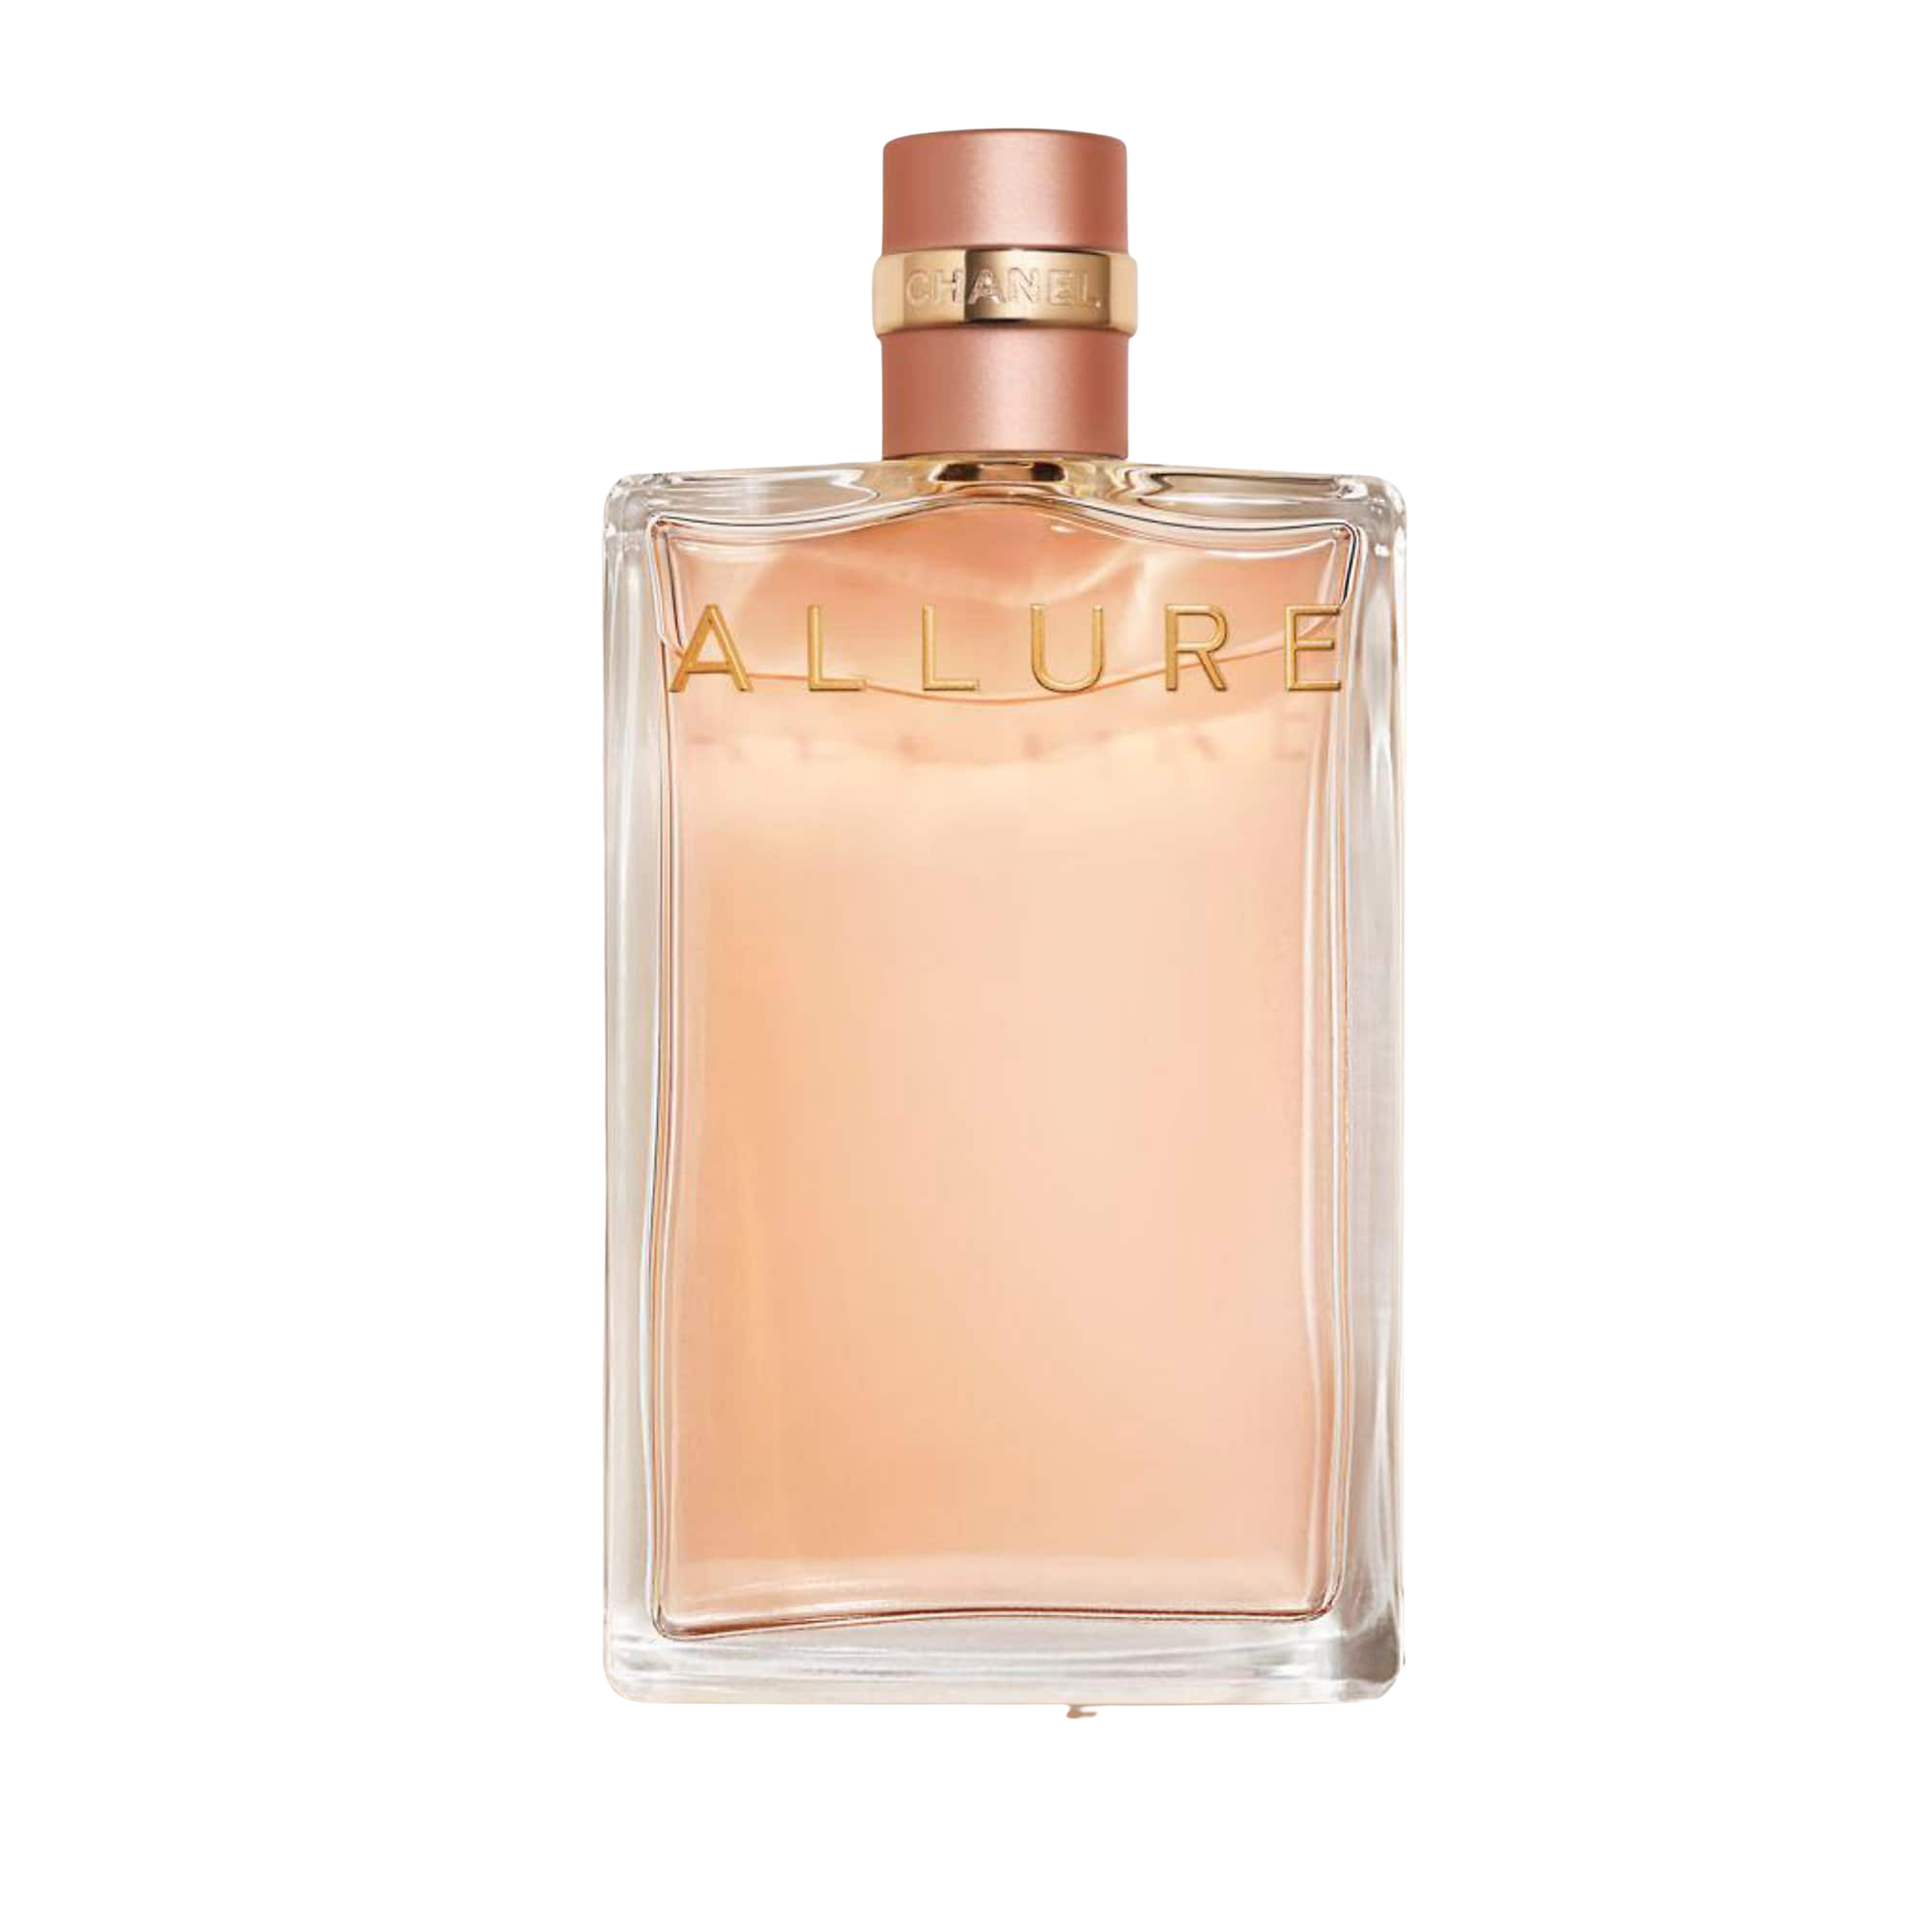 Hair and Body Wash - Inspired by ALLURE HOMME SPORT EAU EXTREME